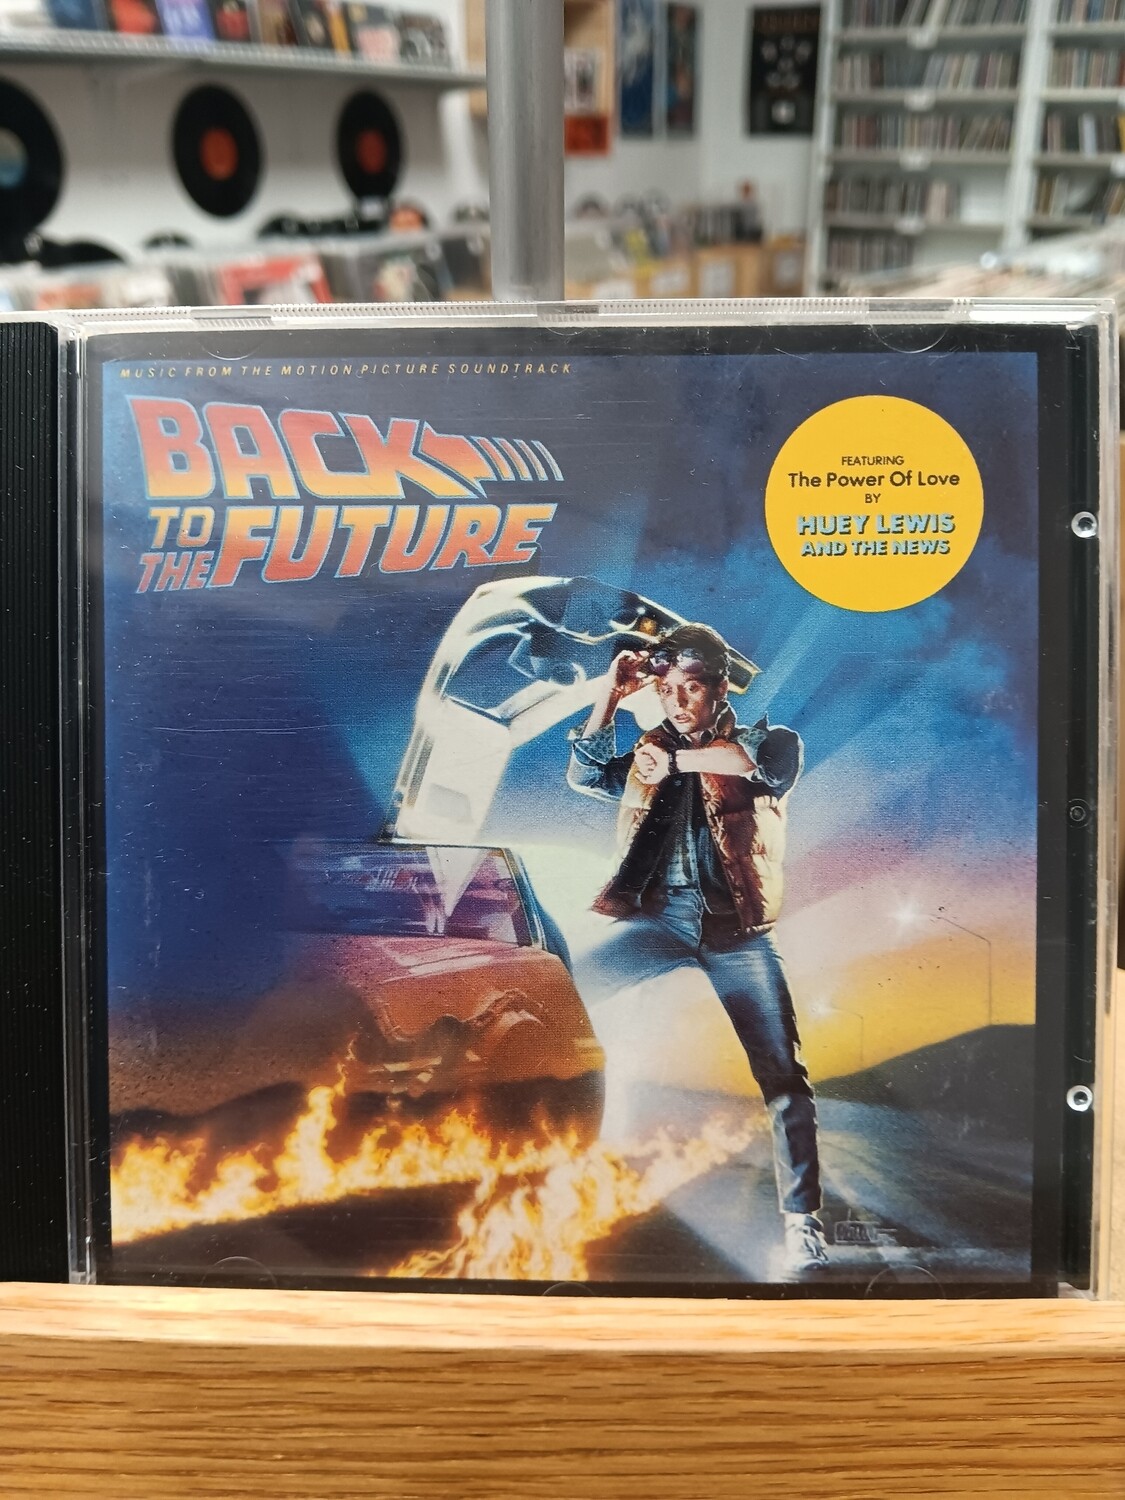 VARIOUS - Back to the future soundtrack (CD)